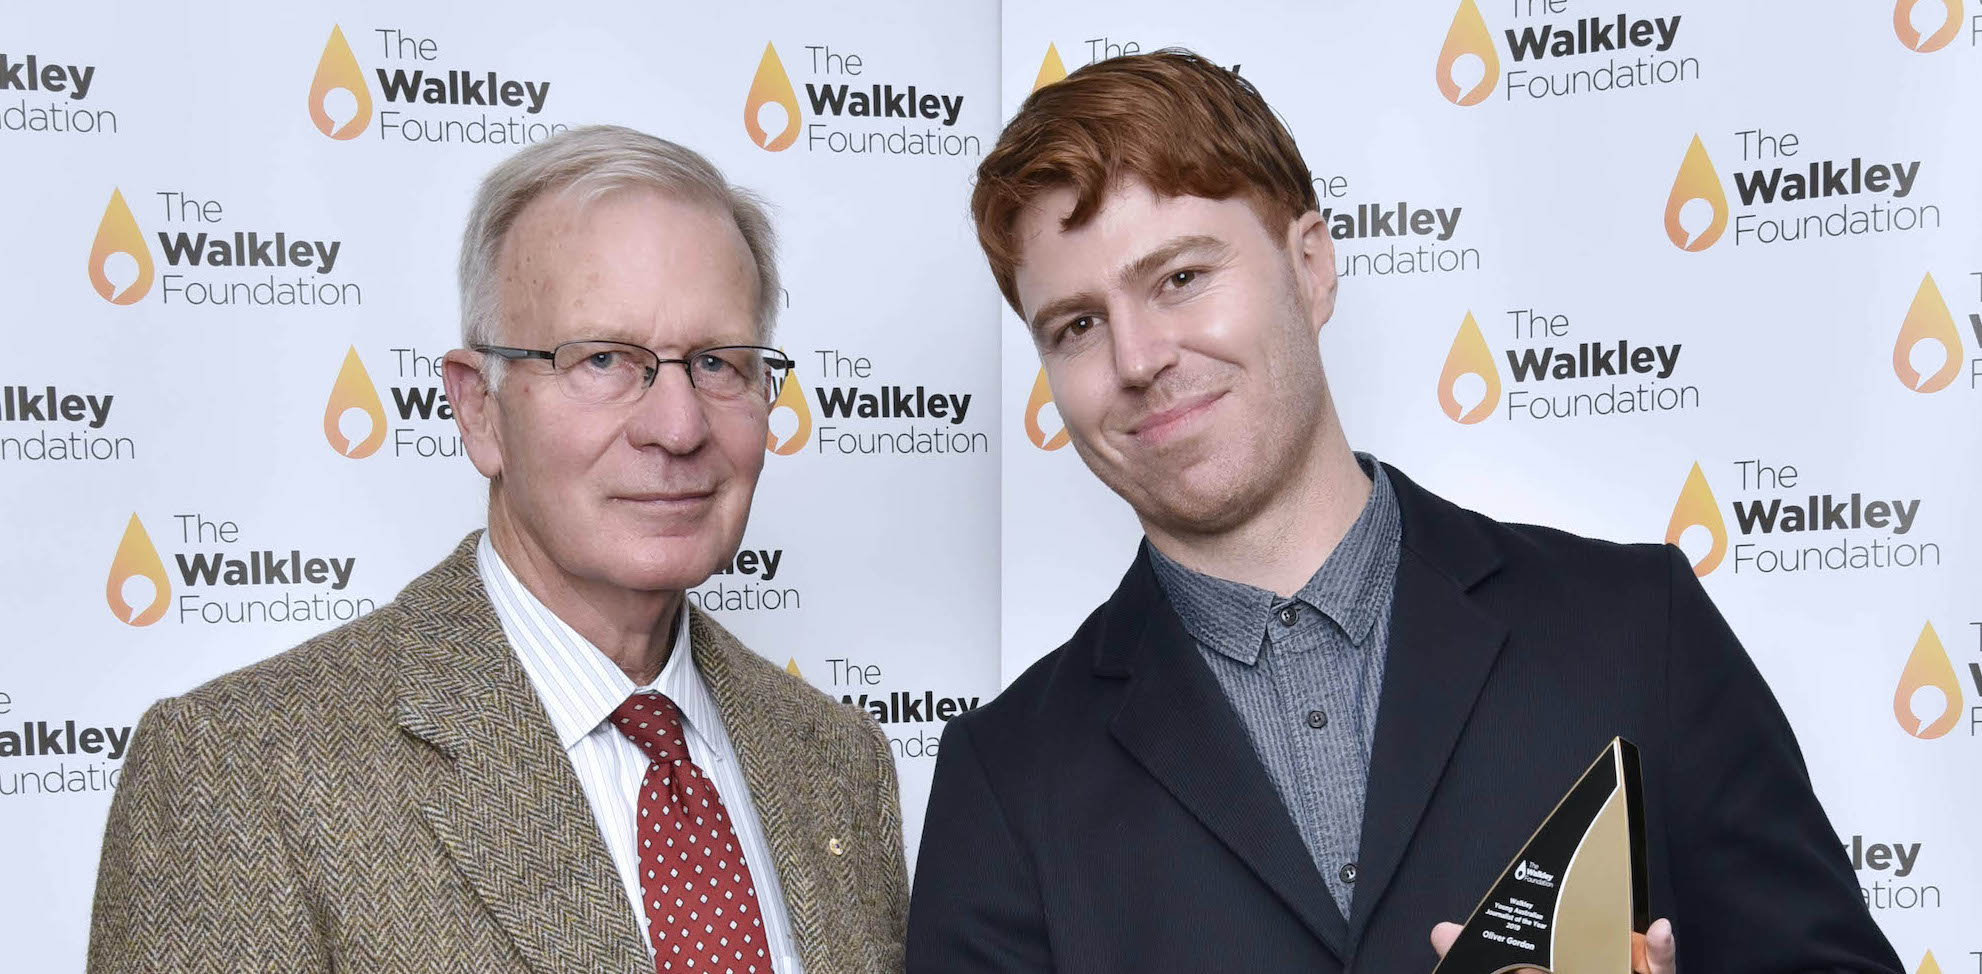 Walkley Foundation receives $1m support for young Australian journalists from John B Fairfax family